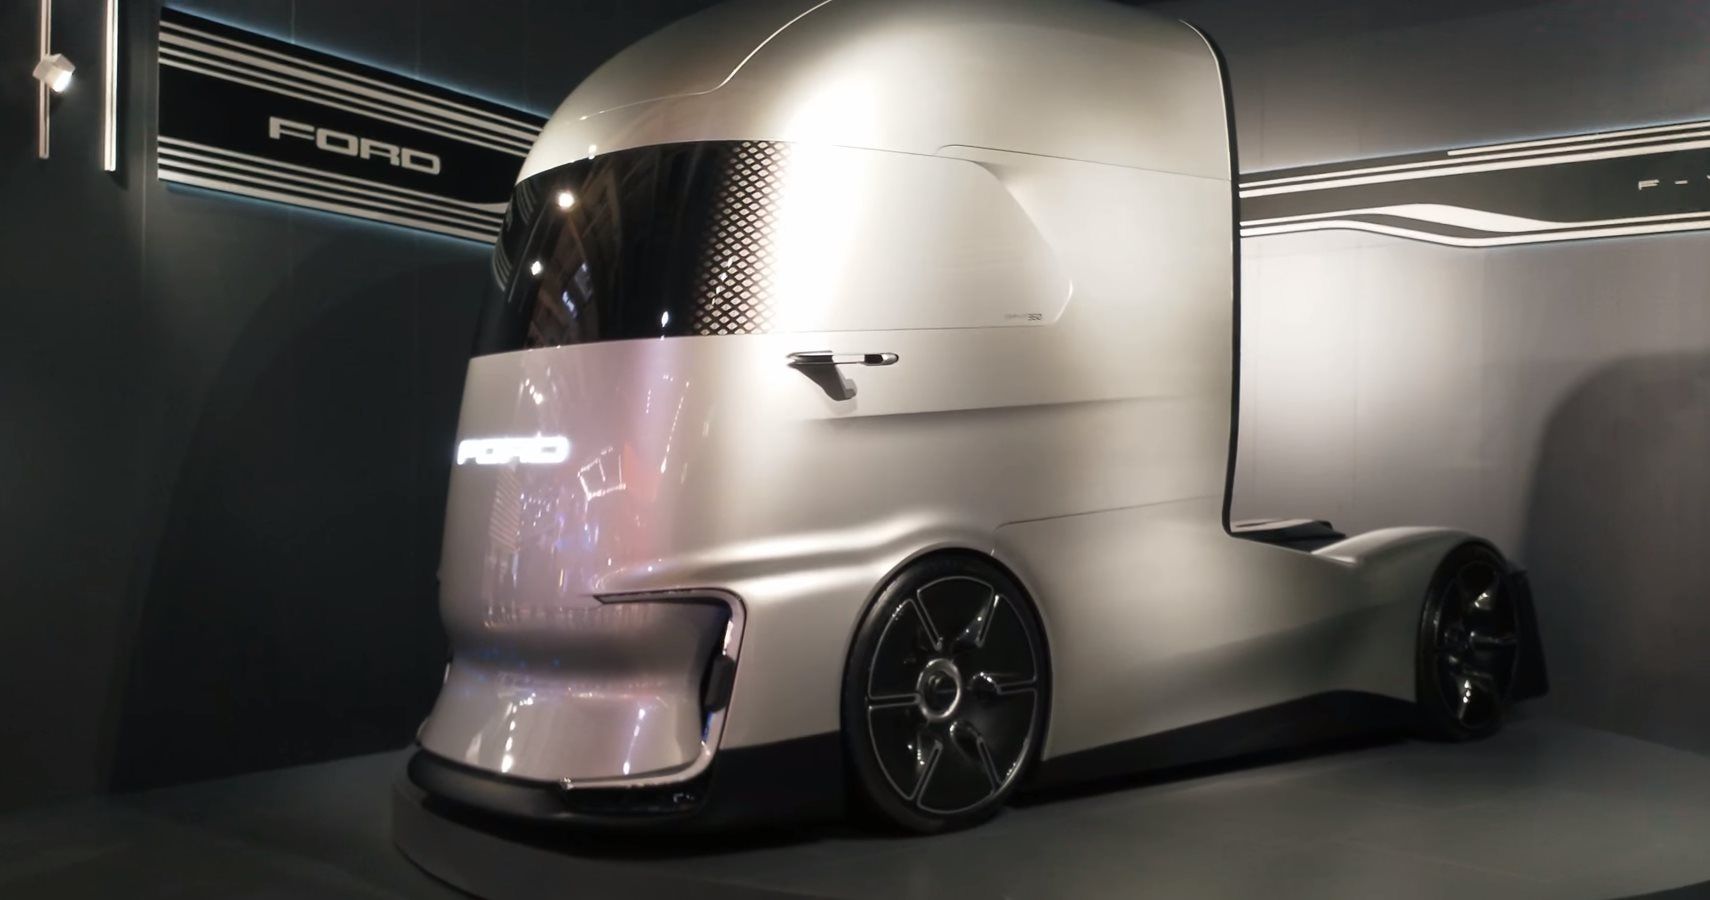 Ford Reveals Electric Semi Truck That Looks Like RoboCop